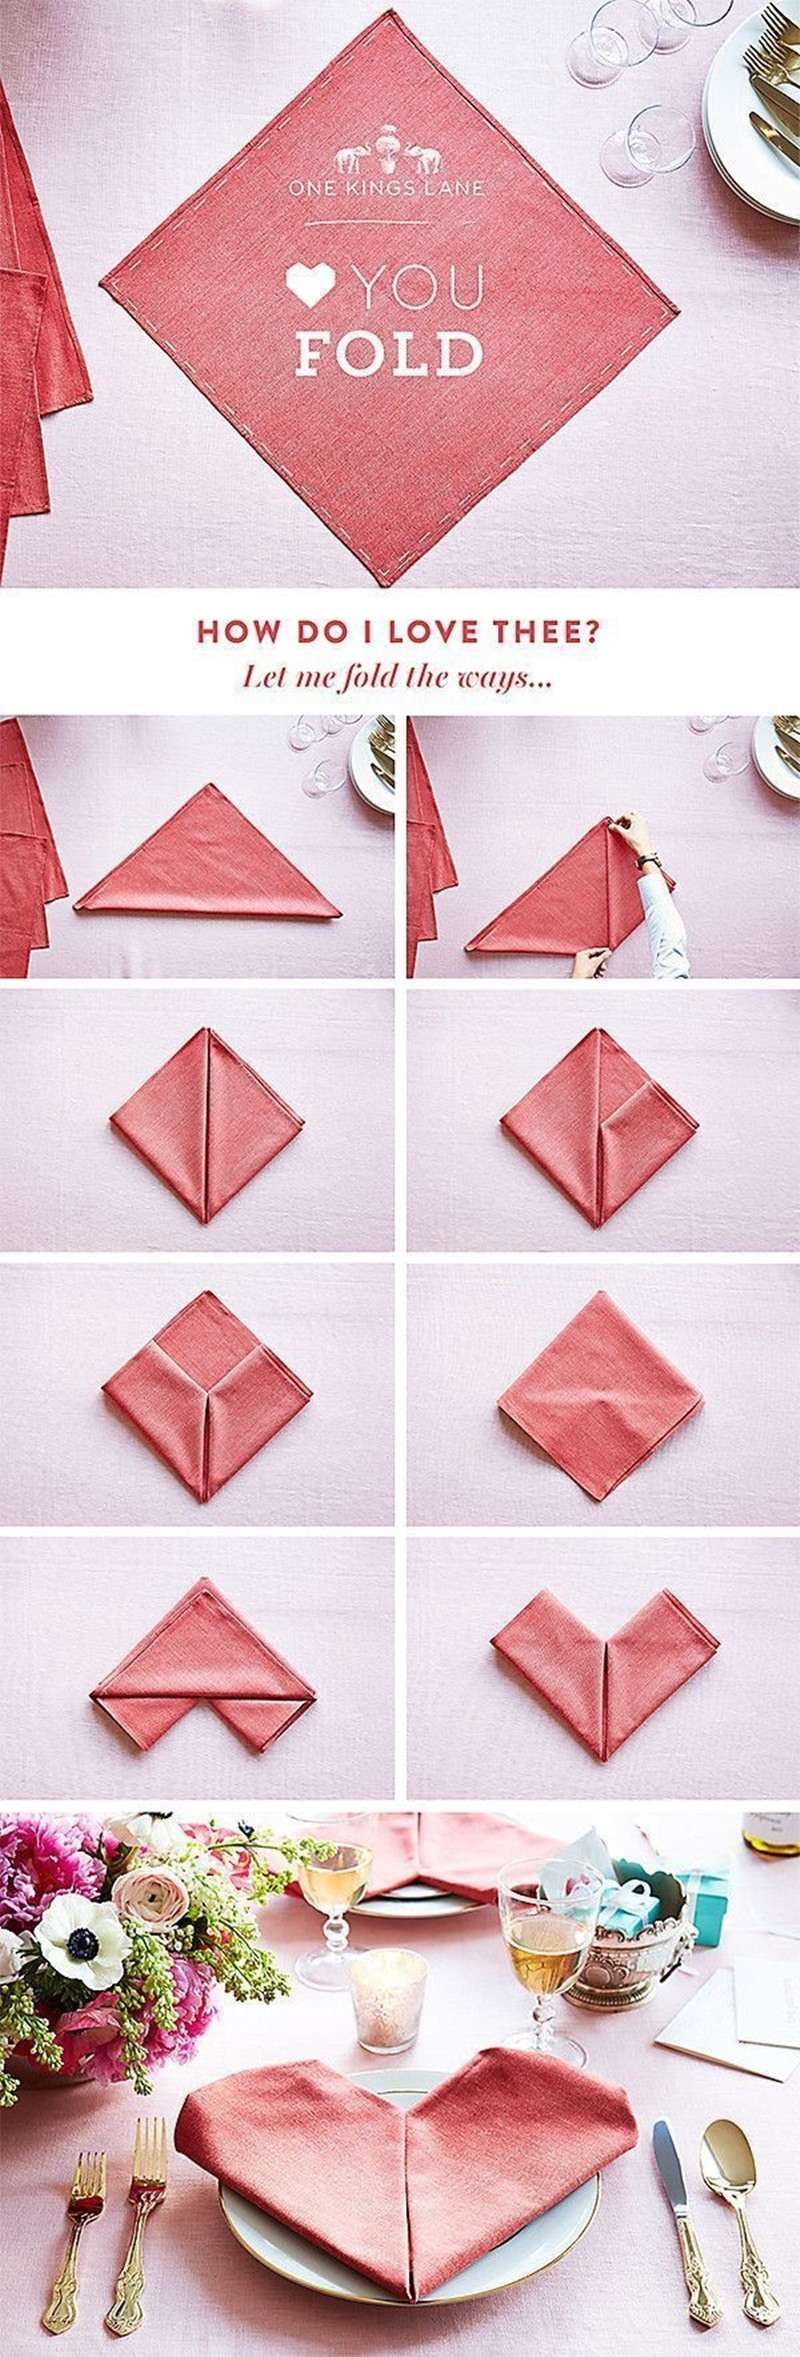 Christmas Origami Napkin 75 Cool Napkin Folding Ideas For Your Next Dinner Party